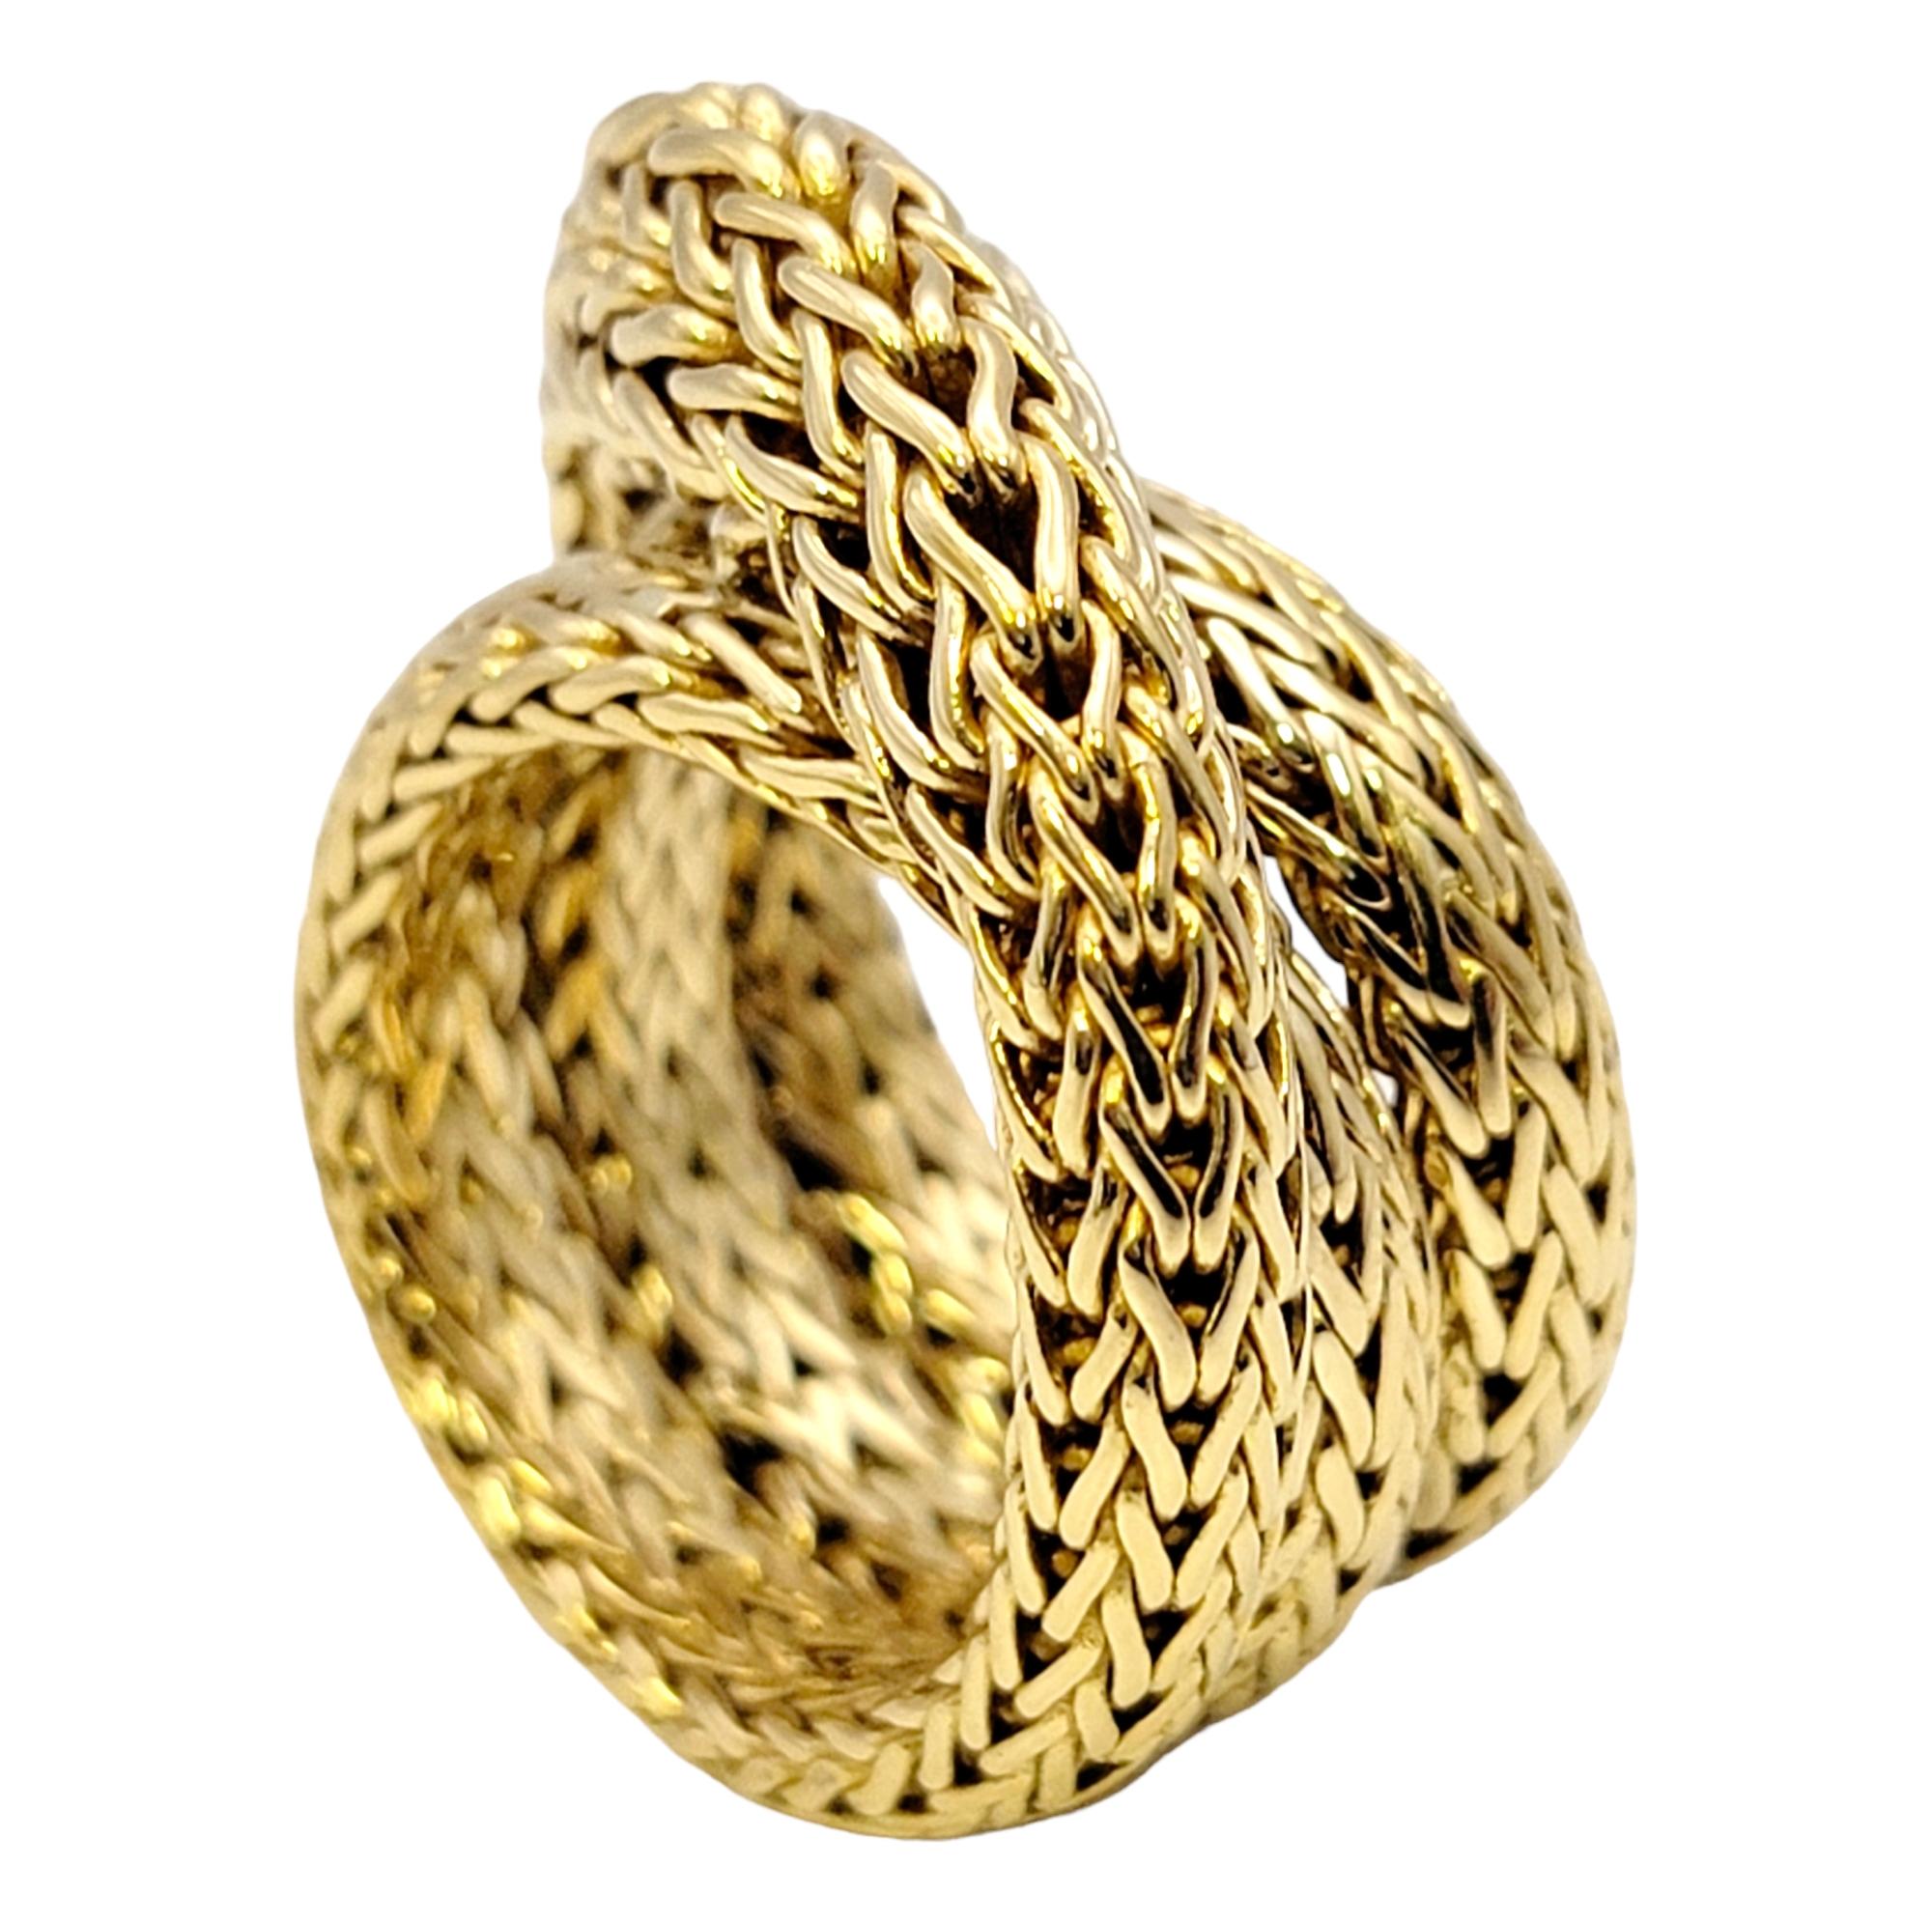 Ring size: 7

This wonderfully textured statement ring by John Hardy is an absolute stunner. Inspired by Bali and its time-honored jewelry-making traditions, John Hardy was founded in 1975 with a dedication to sustainable handcrafted jewelry.